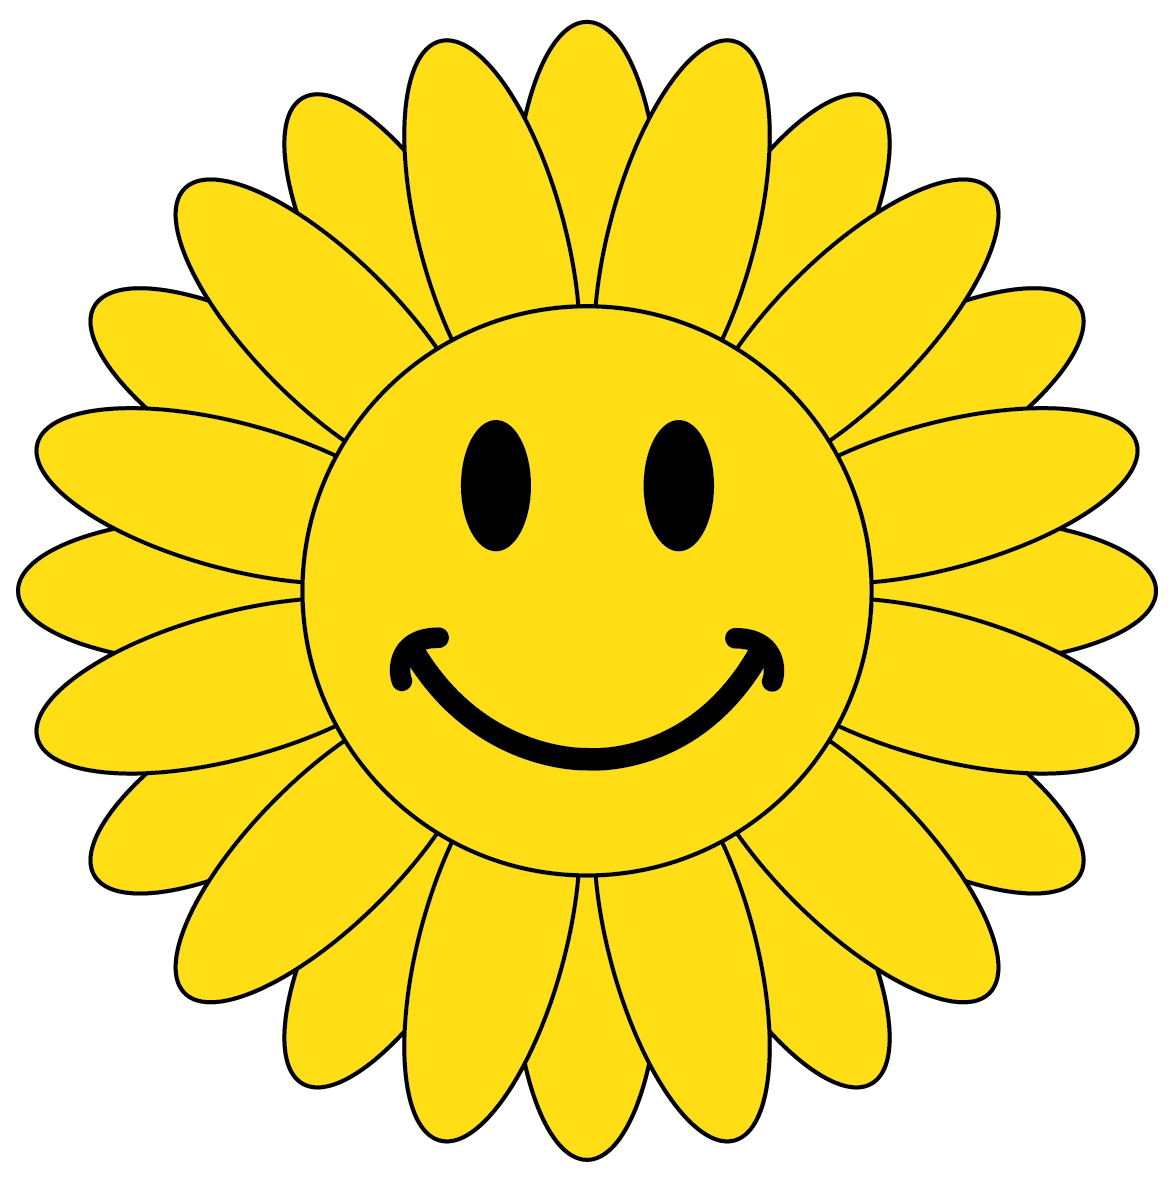 Animated Happy Flower Clipart